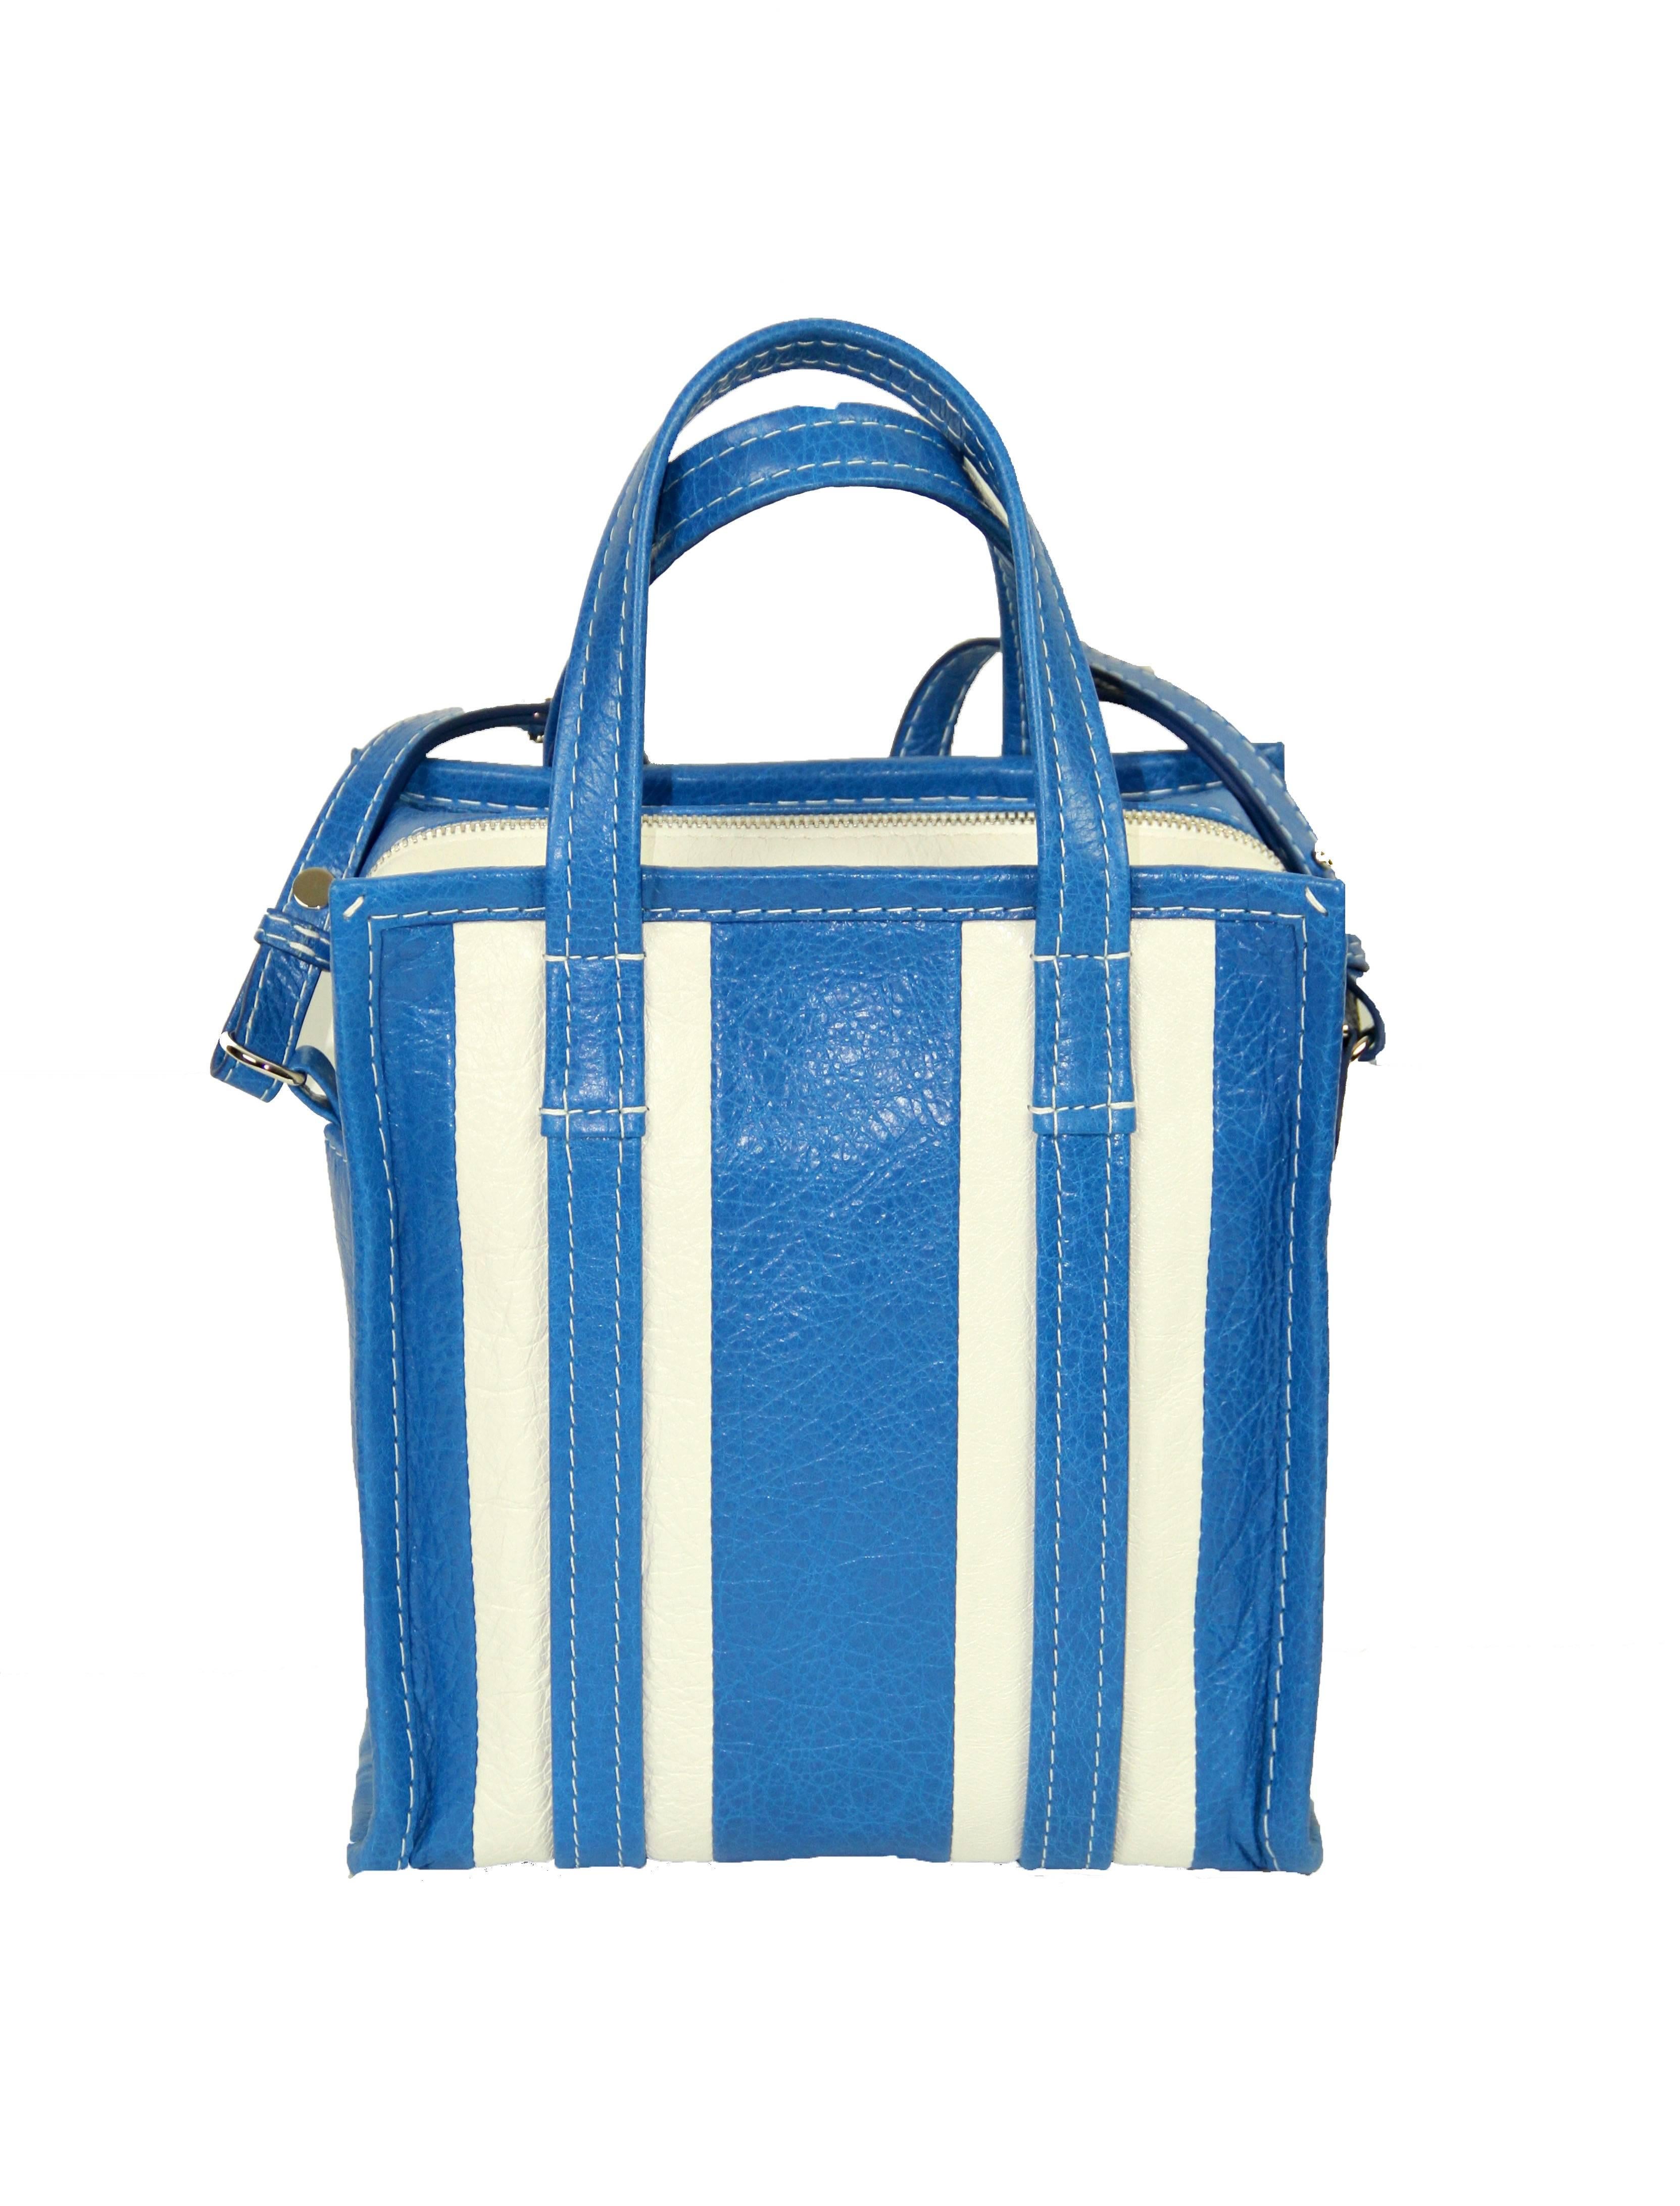 Lovely and coloured tote bag featuring 'Arena' stripes, a top zip closure, an adjustable, removable shoulder strap, two top handles and a gold-tone embossed logo at the front. 

Year: 2017
Material: Leather
Color: White and Blue Lazuli
Hardware: